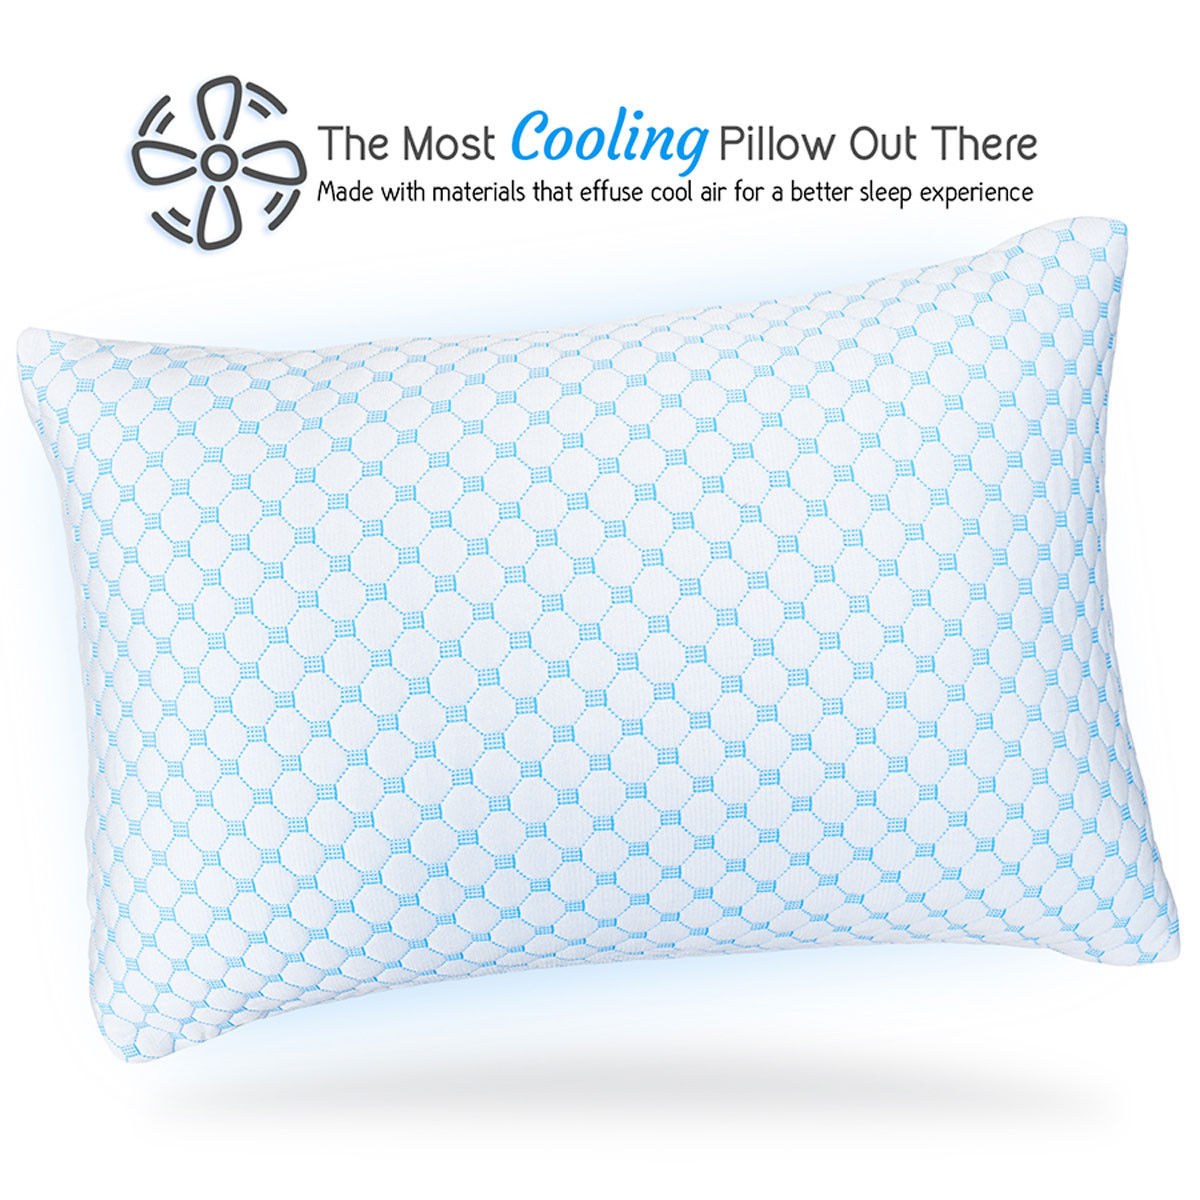 What is the Clara Clark pillow's cooling feature?